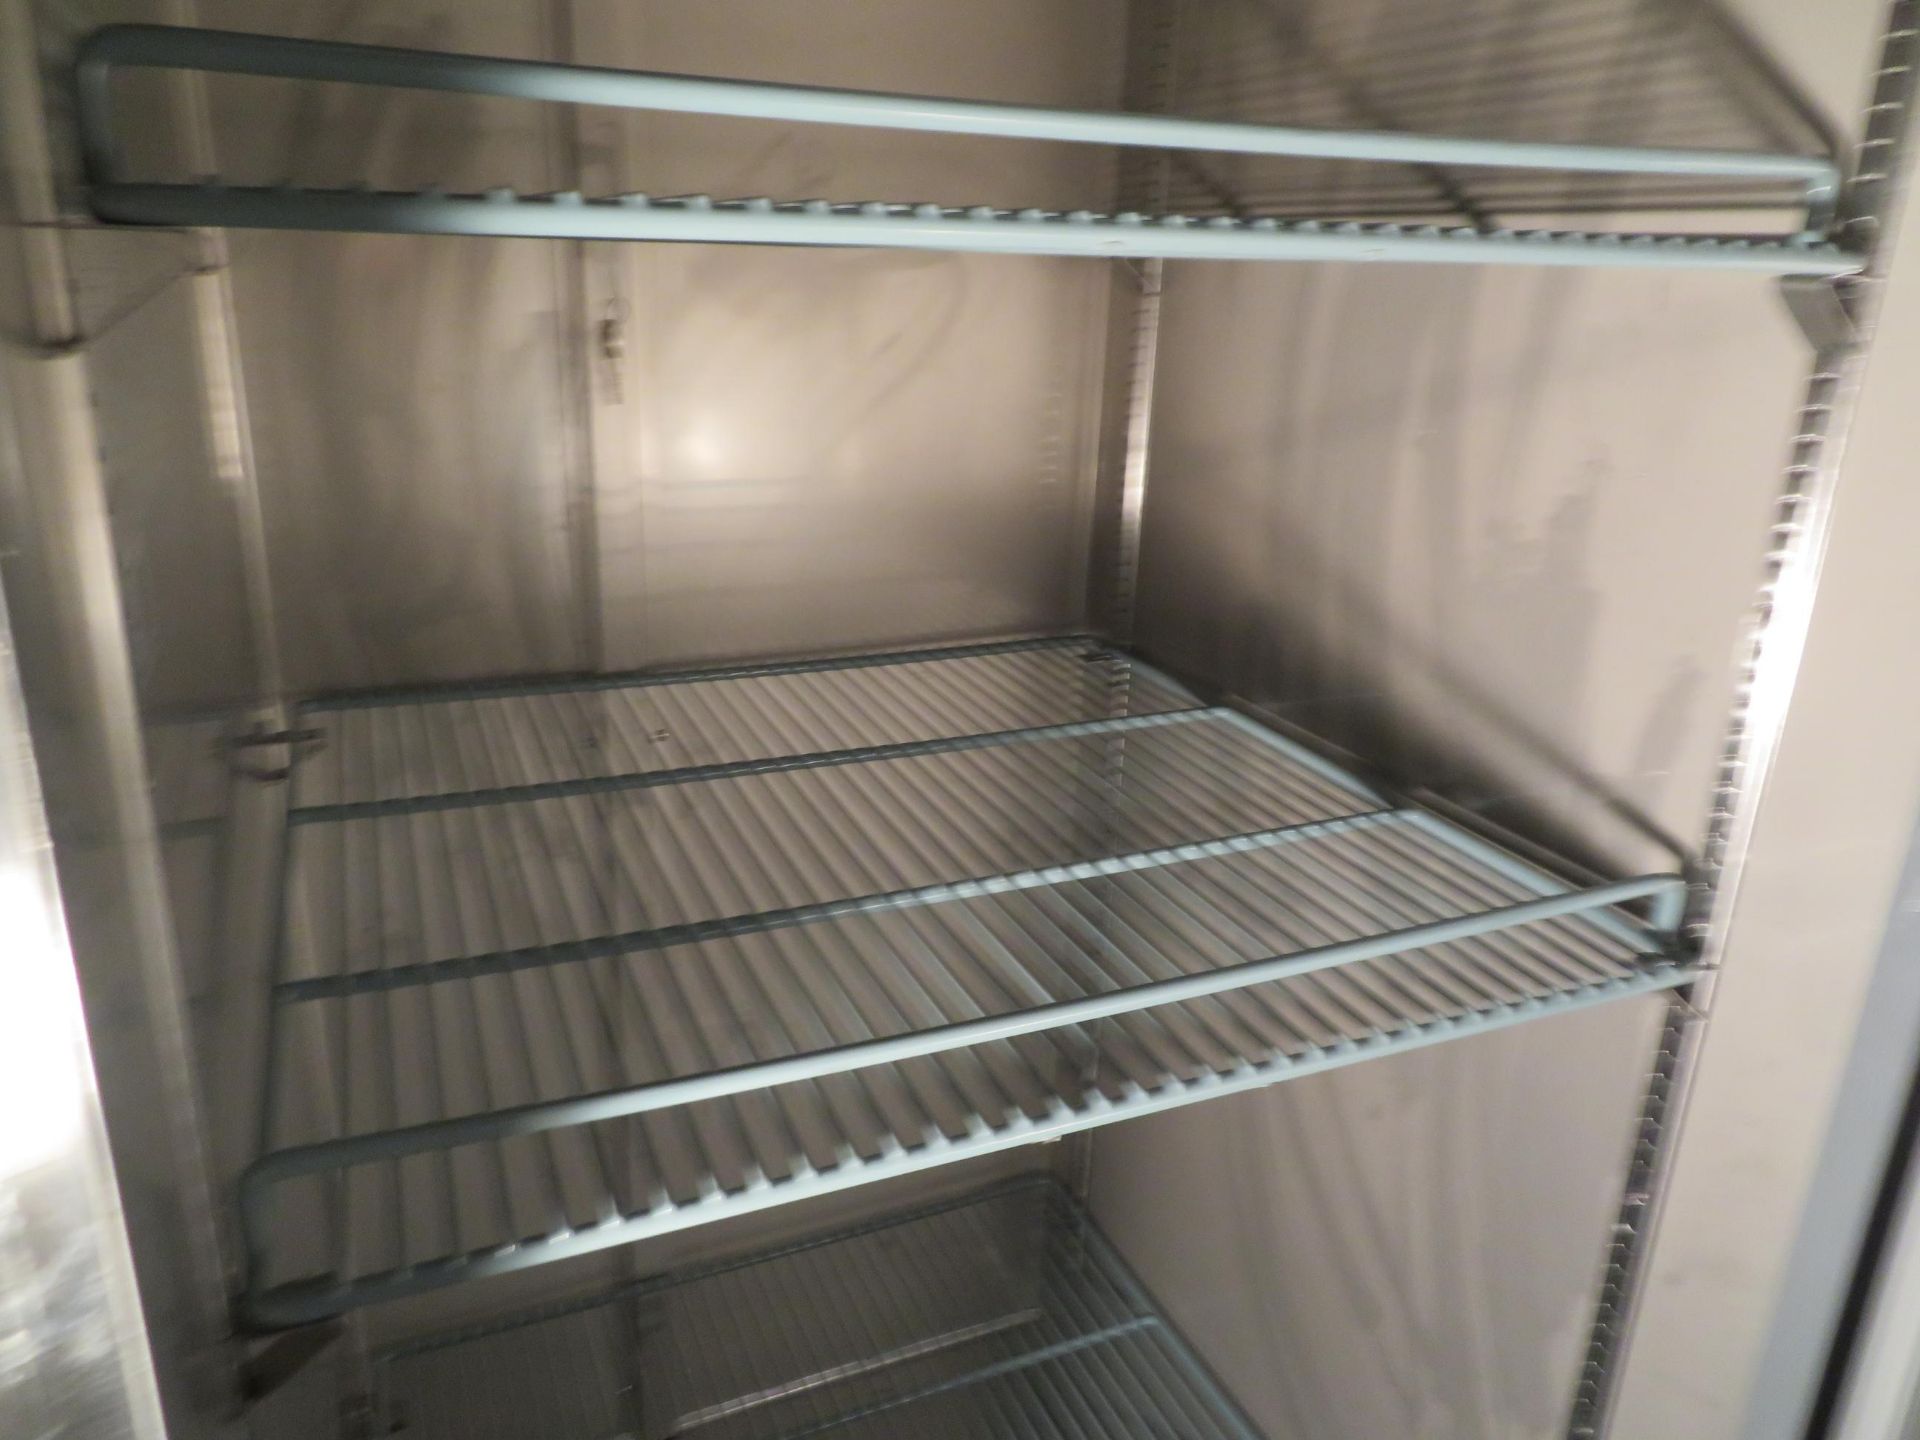 CANCO 1 door stainless steel upright freezer on wheels, Mod # SSF-650, approx. 28"w x 32"d x 77"h - Image 3 of 3